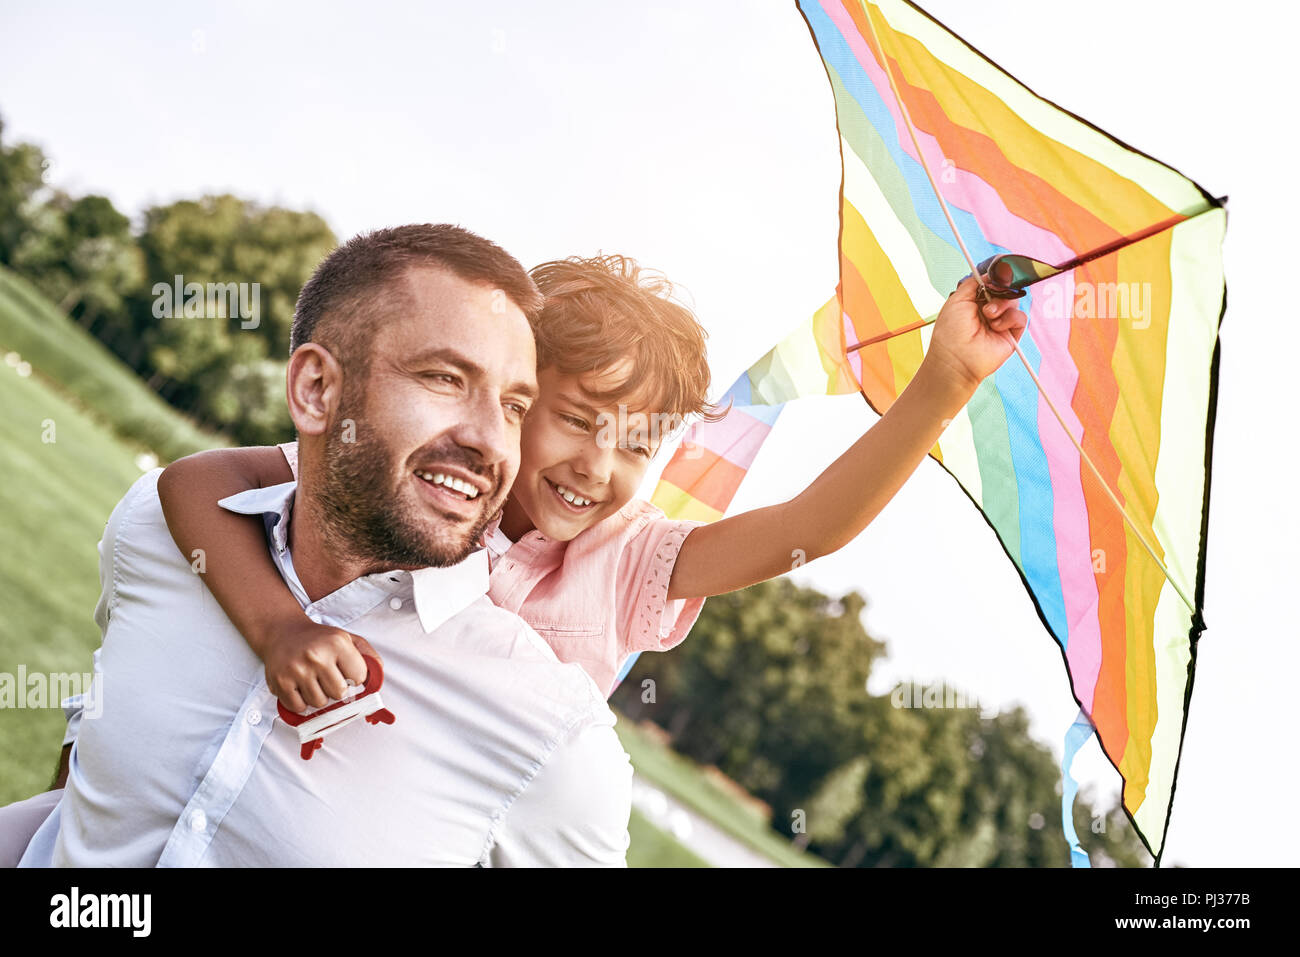 Weekend activities. Father carrying son on his back holding kite Stock Photo